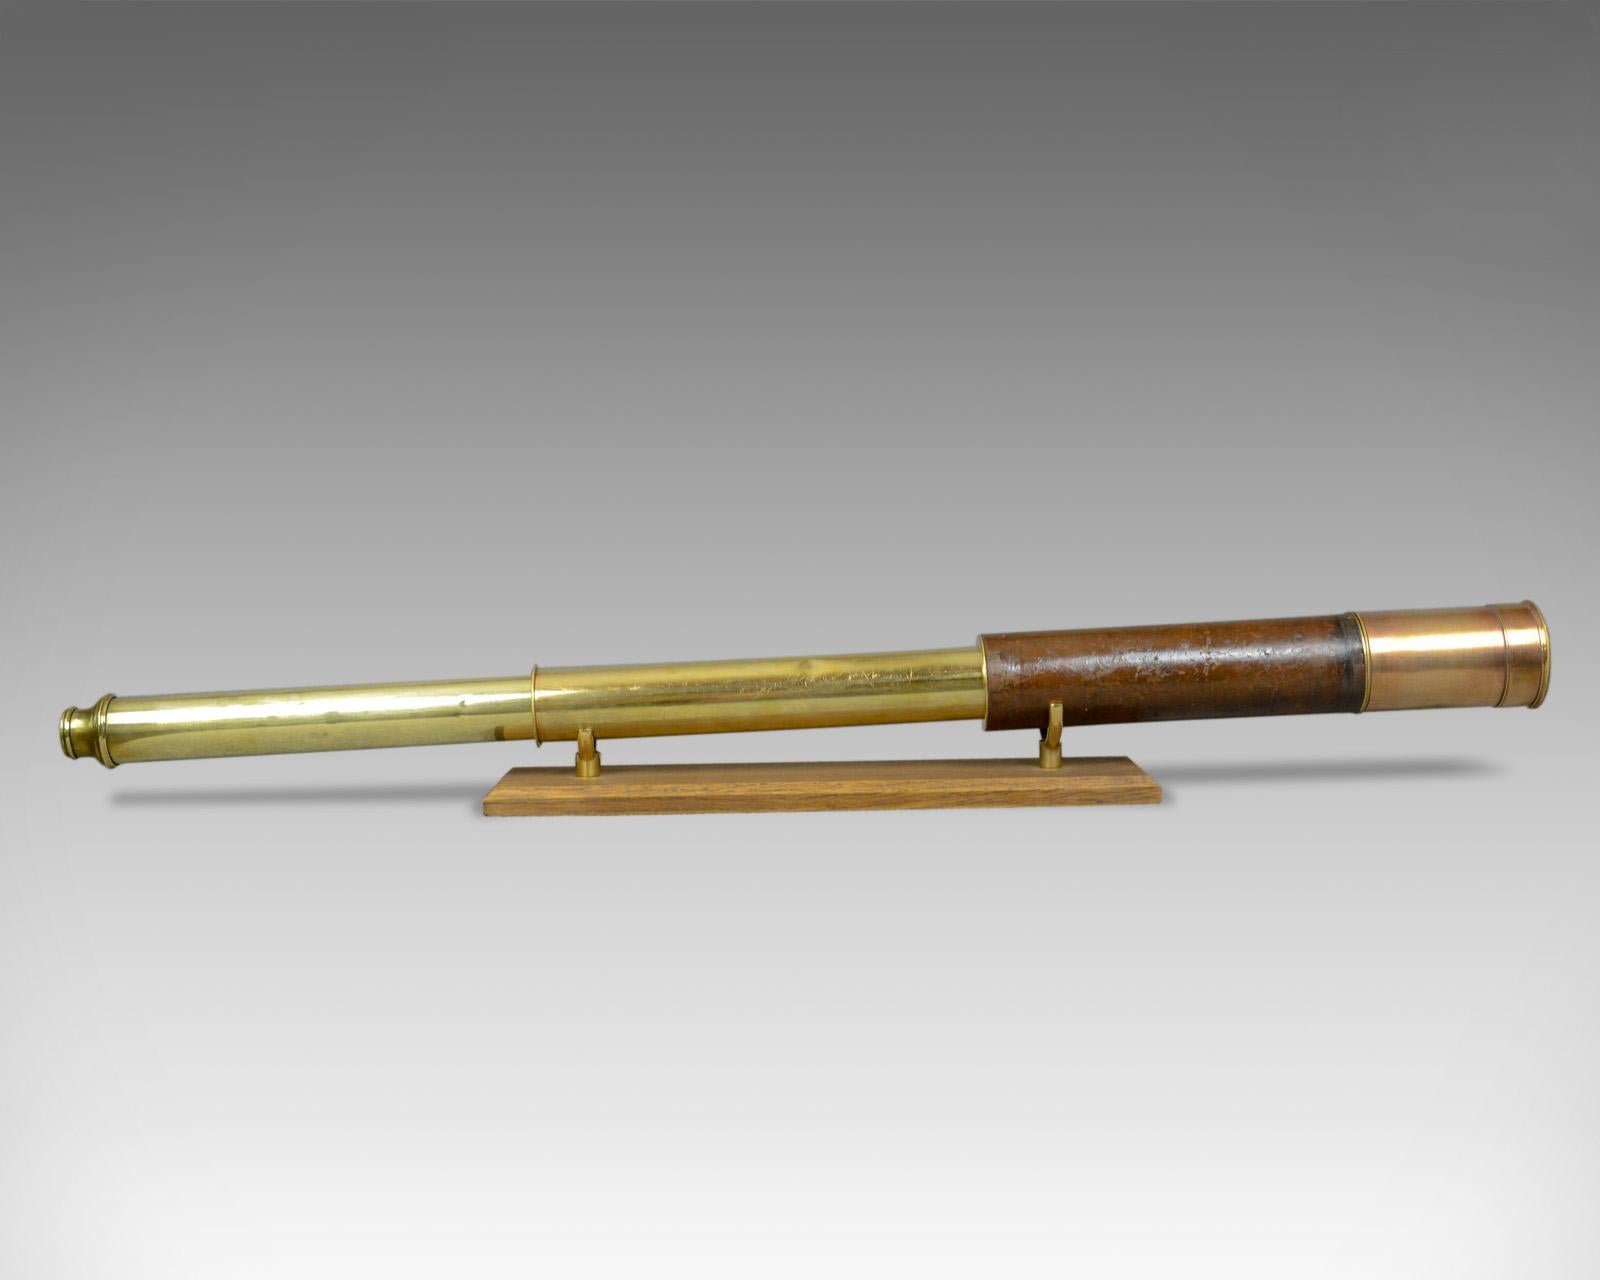 This is an antique telescope, a two draw refractor for terrestrial or astronomical use. An English telescope by Stampa and Son, London dating to the late Georgian period, circa 1810.

Perfect for bird watching, landscape appreciation, wildlife, or